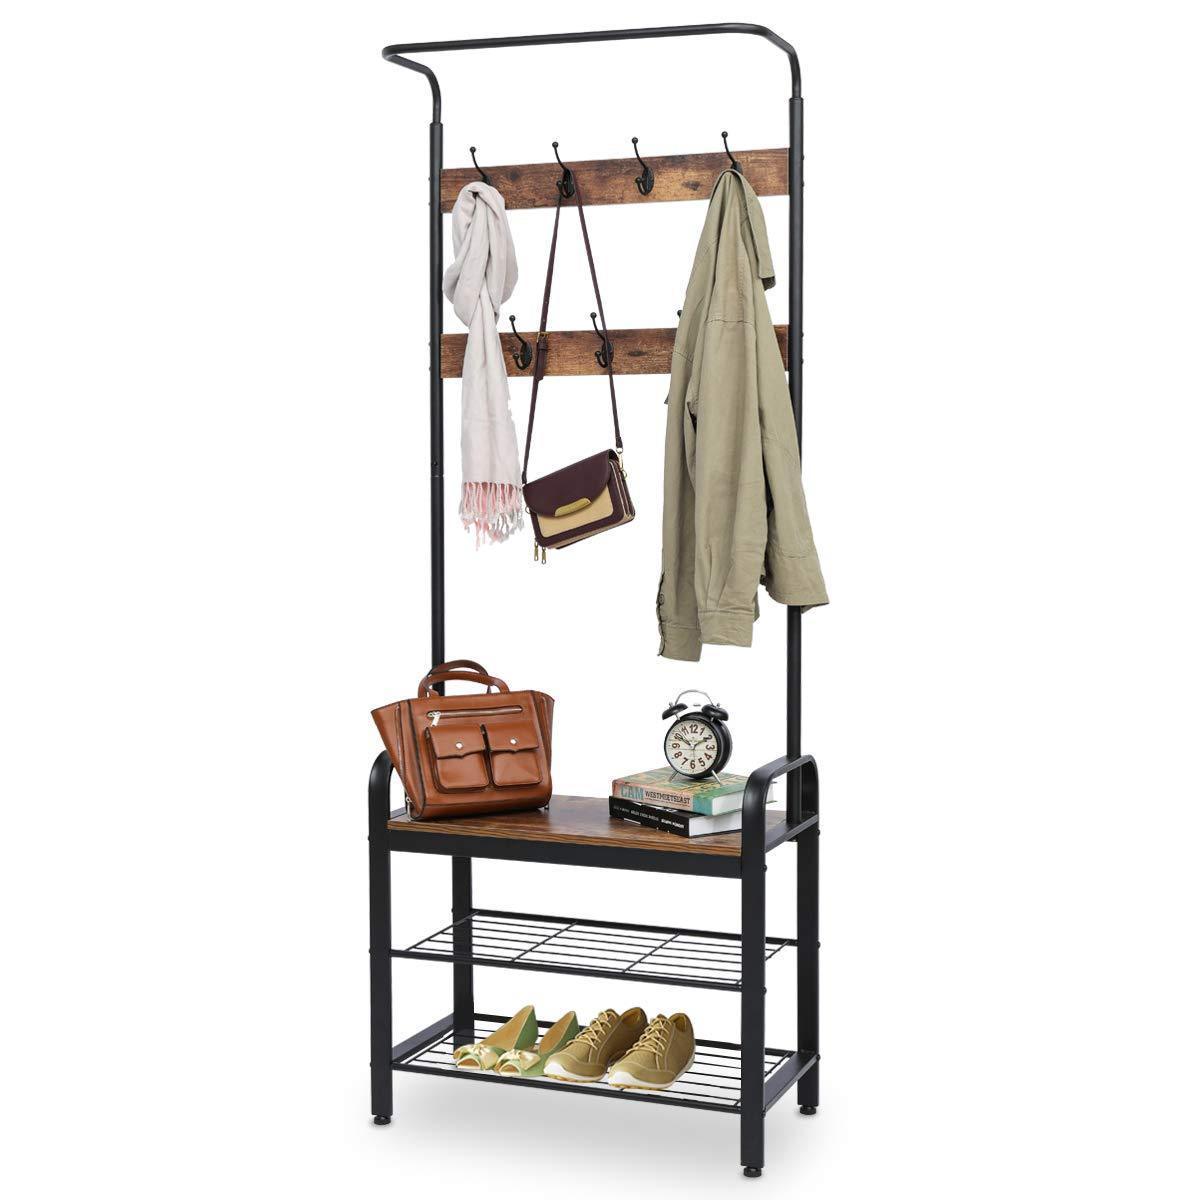 Industrial Coat Rack, Hall Tree Entryway Coat Shoe Rack 3-Tier Shoe Bench 7 Hooks, Wood Look Accent Furniture with Stable Metal Frame Easy Assembly